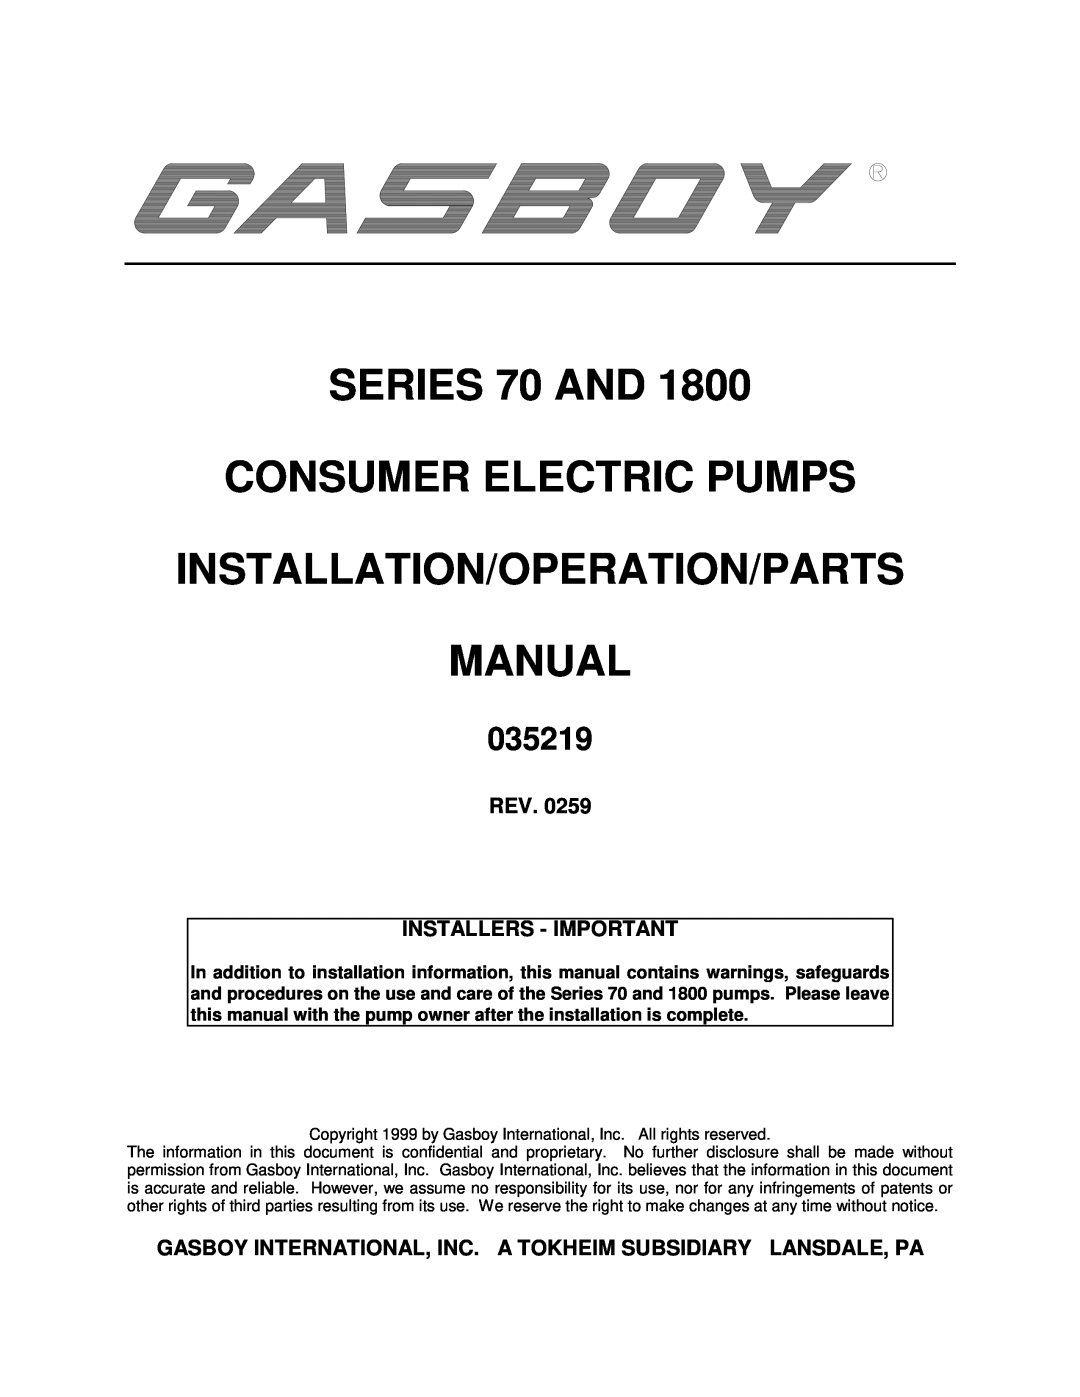 Husky 1800 Series, 70 Series manual 035219, Rev. Installers - Important, SERIES 70 AND CONSUMER ELECTRIC PUMPS 